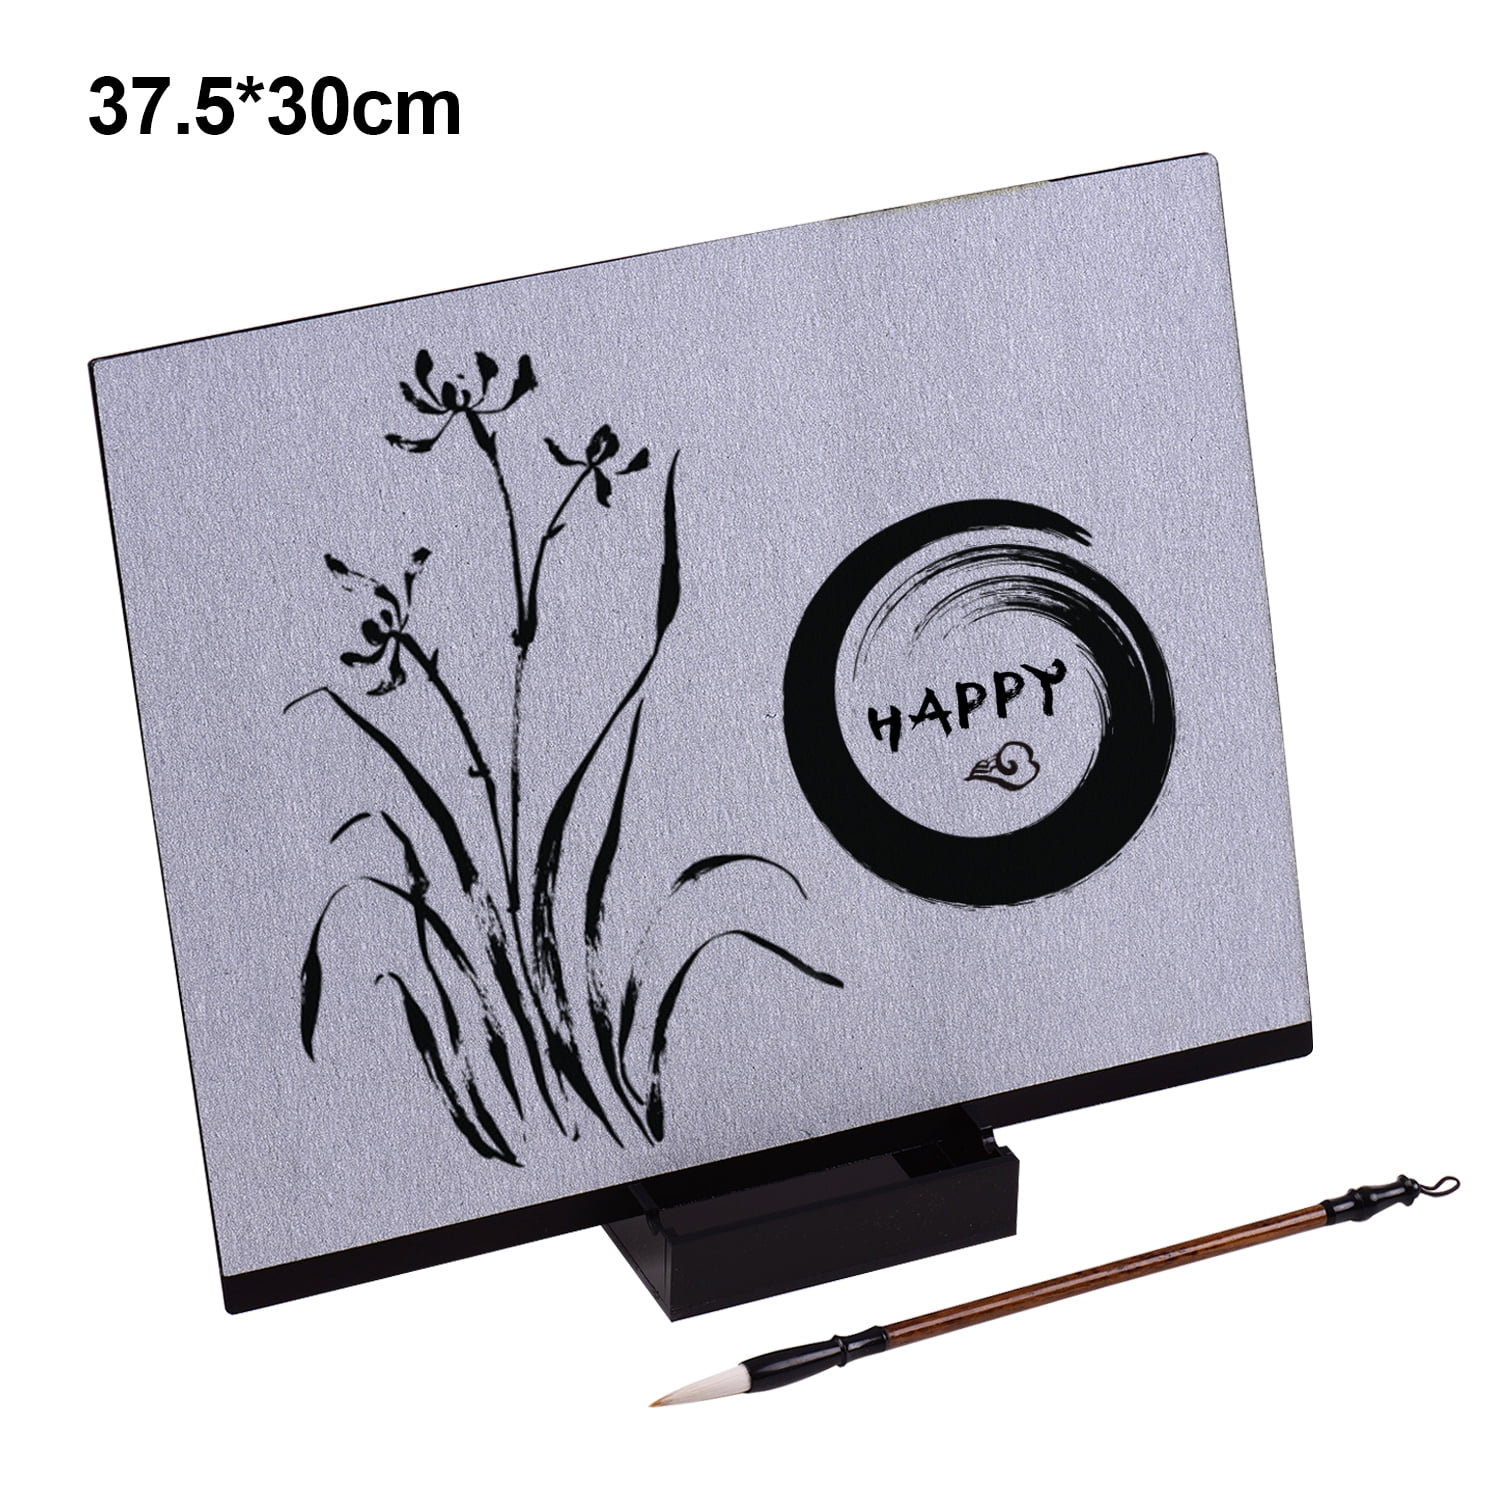  Buddha Board Enso: Portable Water Painting w/ Brush & Portable  for Mindfulness & Meditation Anywhere you Go – Inkless Drawing Board,  Painting & Art Supplies – Ideal Meditation Gifts (10” x 10”)